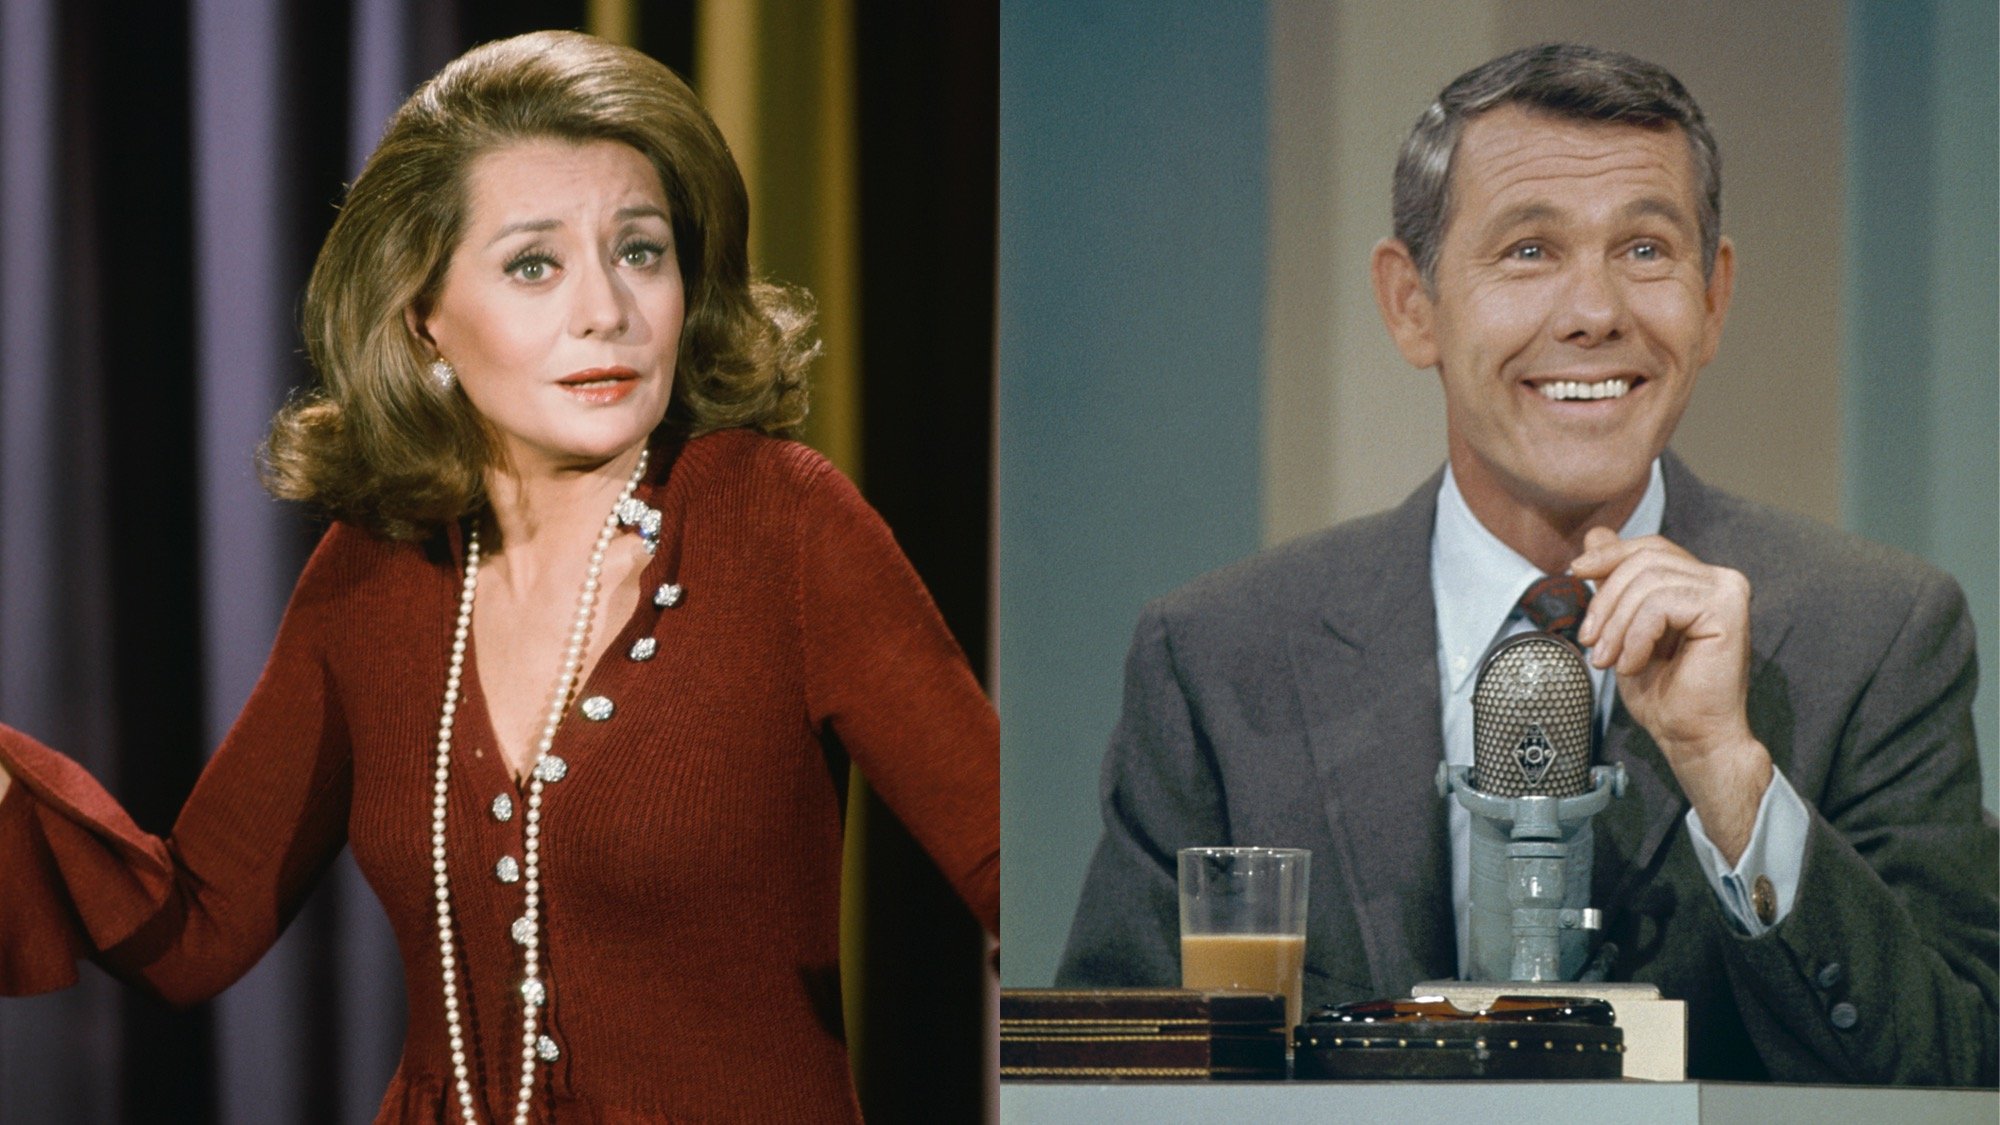 (L) Barbara Walters guest hosts 'The Tonight Show.' (R) Johnny Carson hosts 'The Tonight Show.'